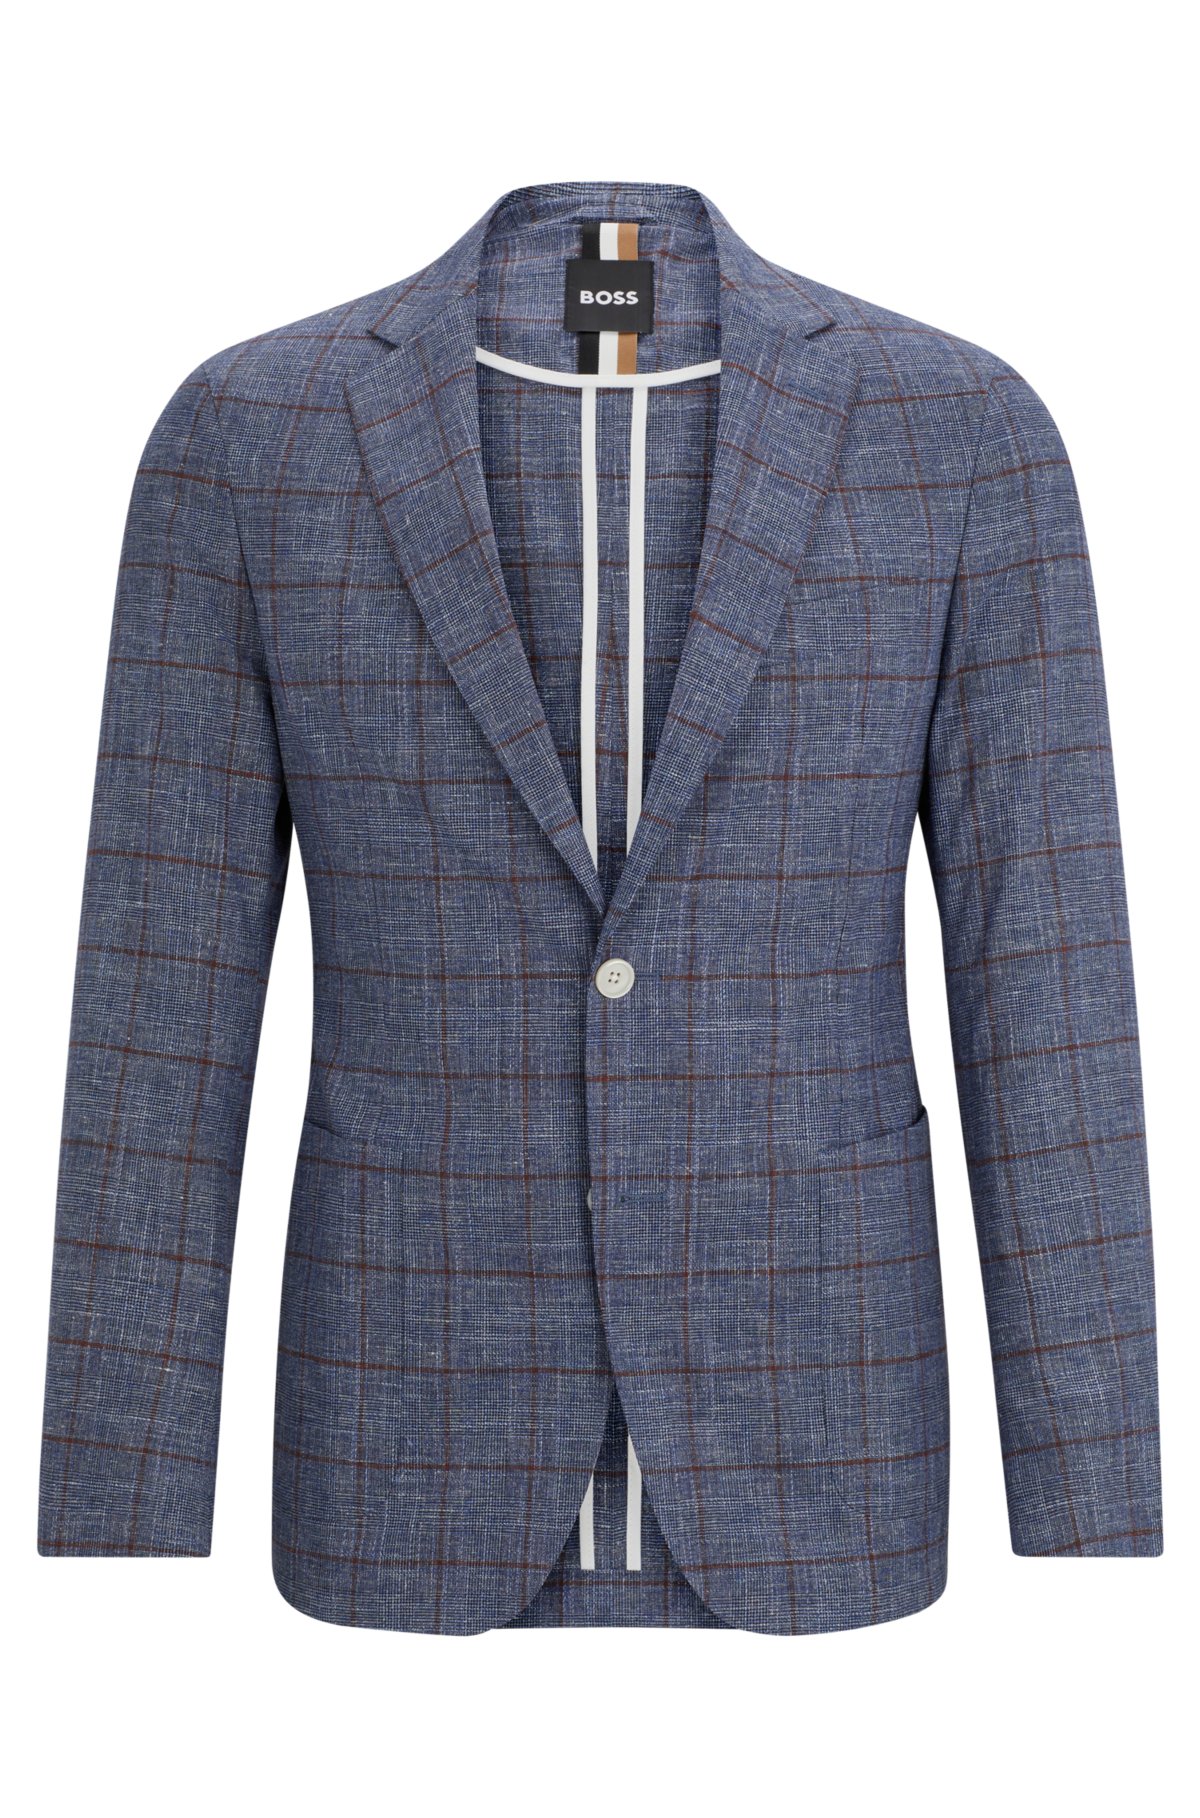 Slim-fit micro-patterned jacket in checked serge, Blue